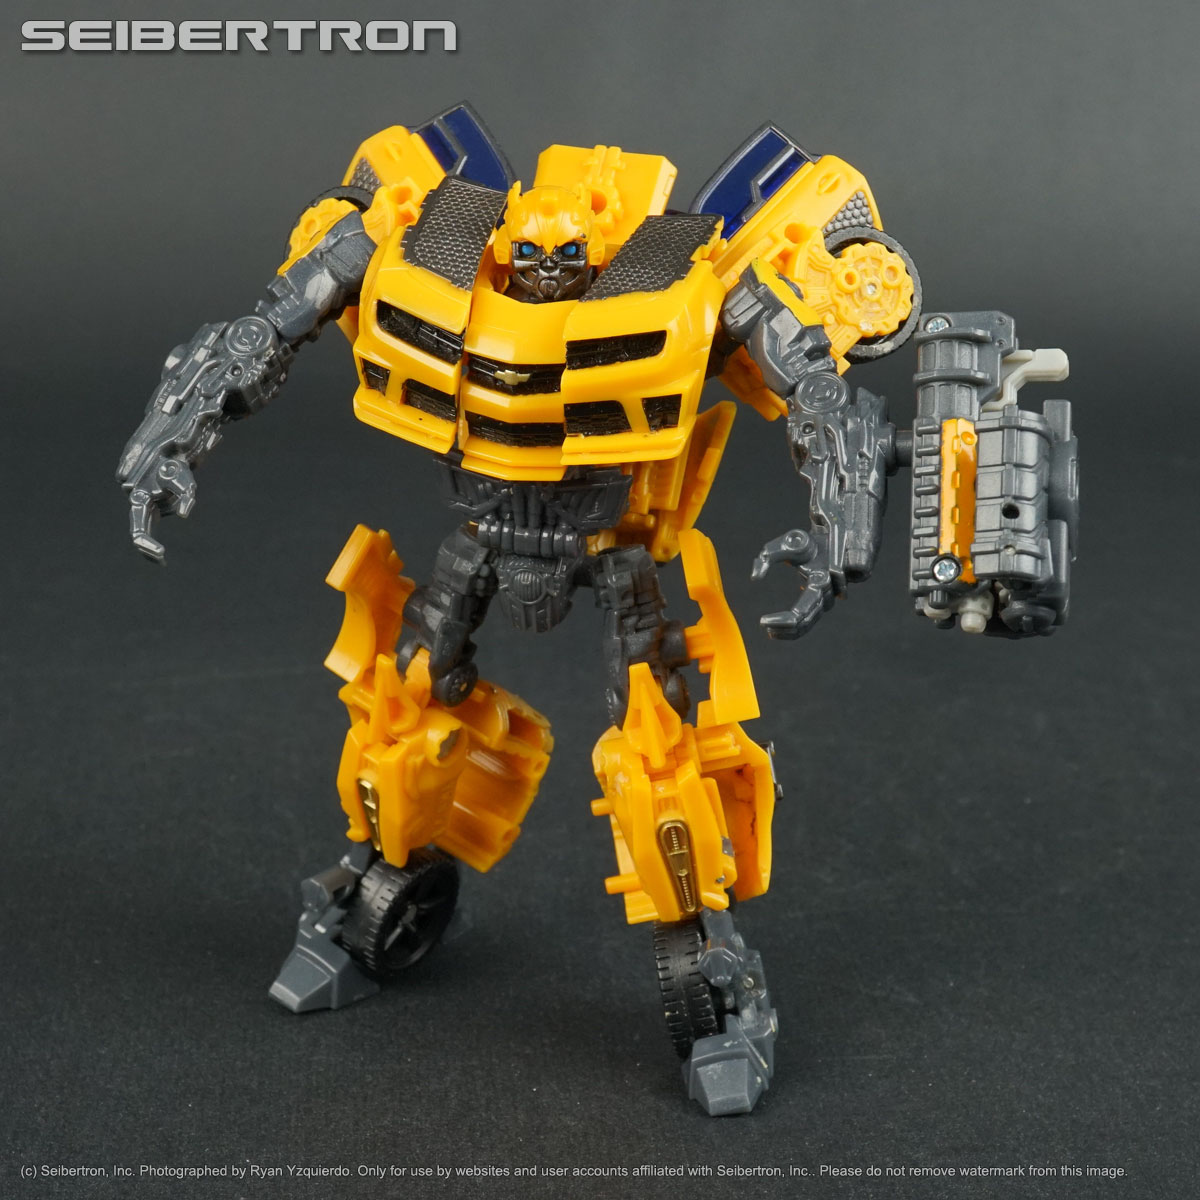 NITRO BUMBLEBEE Transformers Dark of the Moon Deluxe complete DOTM 2011 230427A